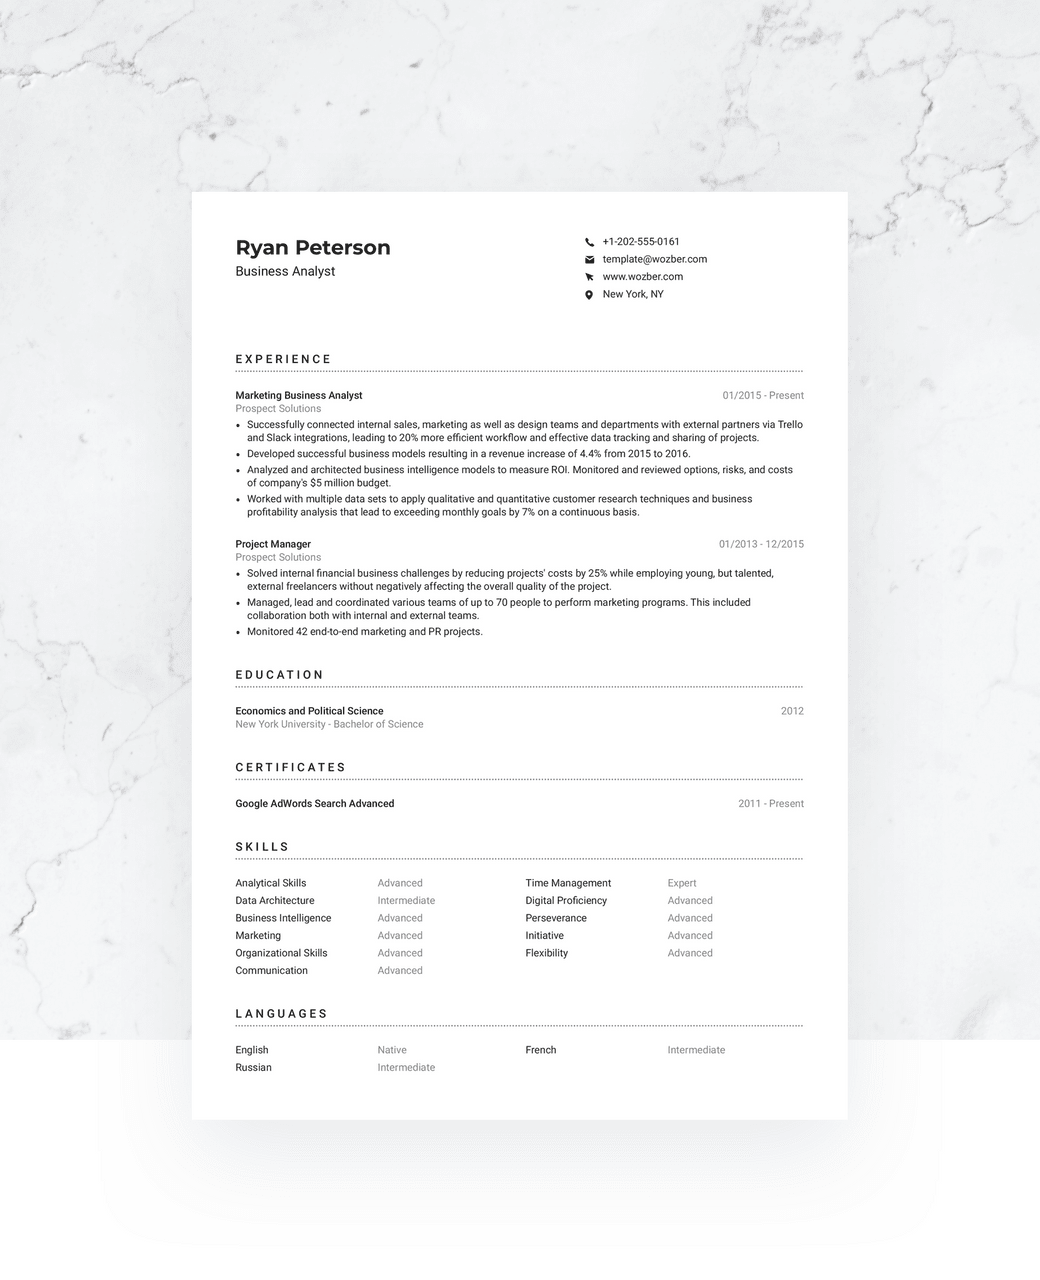 A classic, one-column resume template optimized for applicant tracking systems.